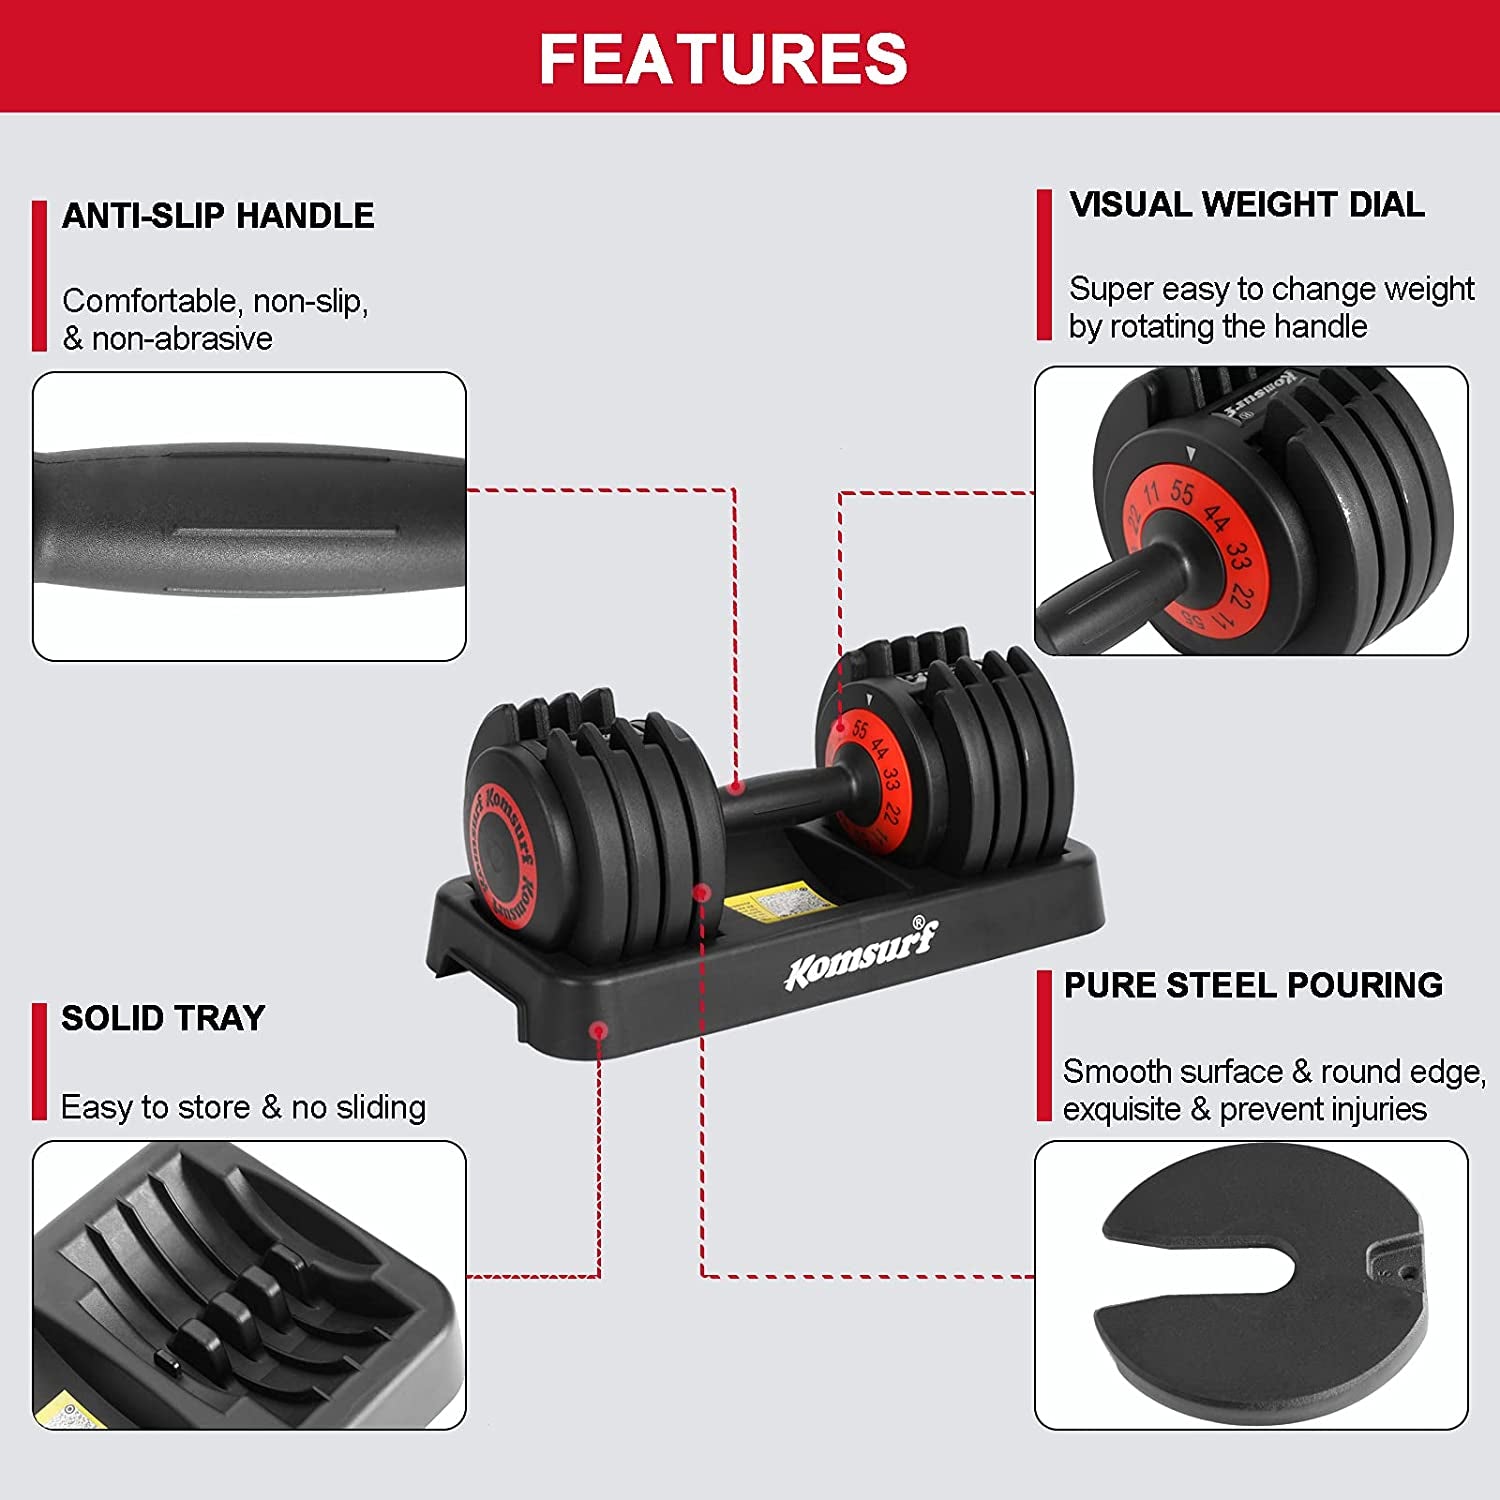 Adjustable Dumbbell, 25/55 Lb Single Dumbbell for Men and Women with Weight Dial Function, Fast Adjust Weight by Rotating Handle, Black Dumbbell with Tray Suitable for Strength Training